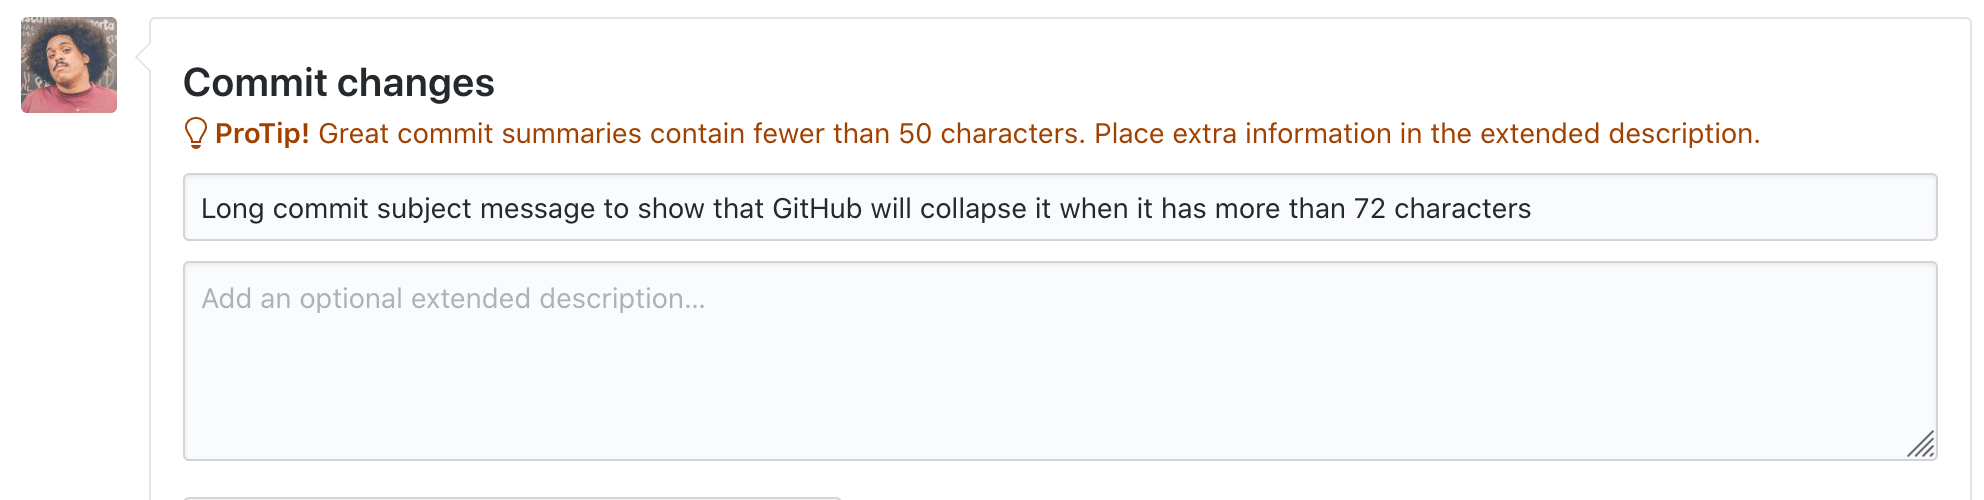 Imagem de um campo de texto com o título "Commit message" contendo a mensagem "Long commit subject message to show that GitHub will collapse it when it has more than 72 characters" e um texto de aviso com a mensagem "Pro tip! Great commit summaries contain fewer than 50 characters. Place extra information in the extended description"